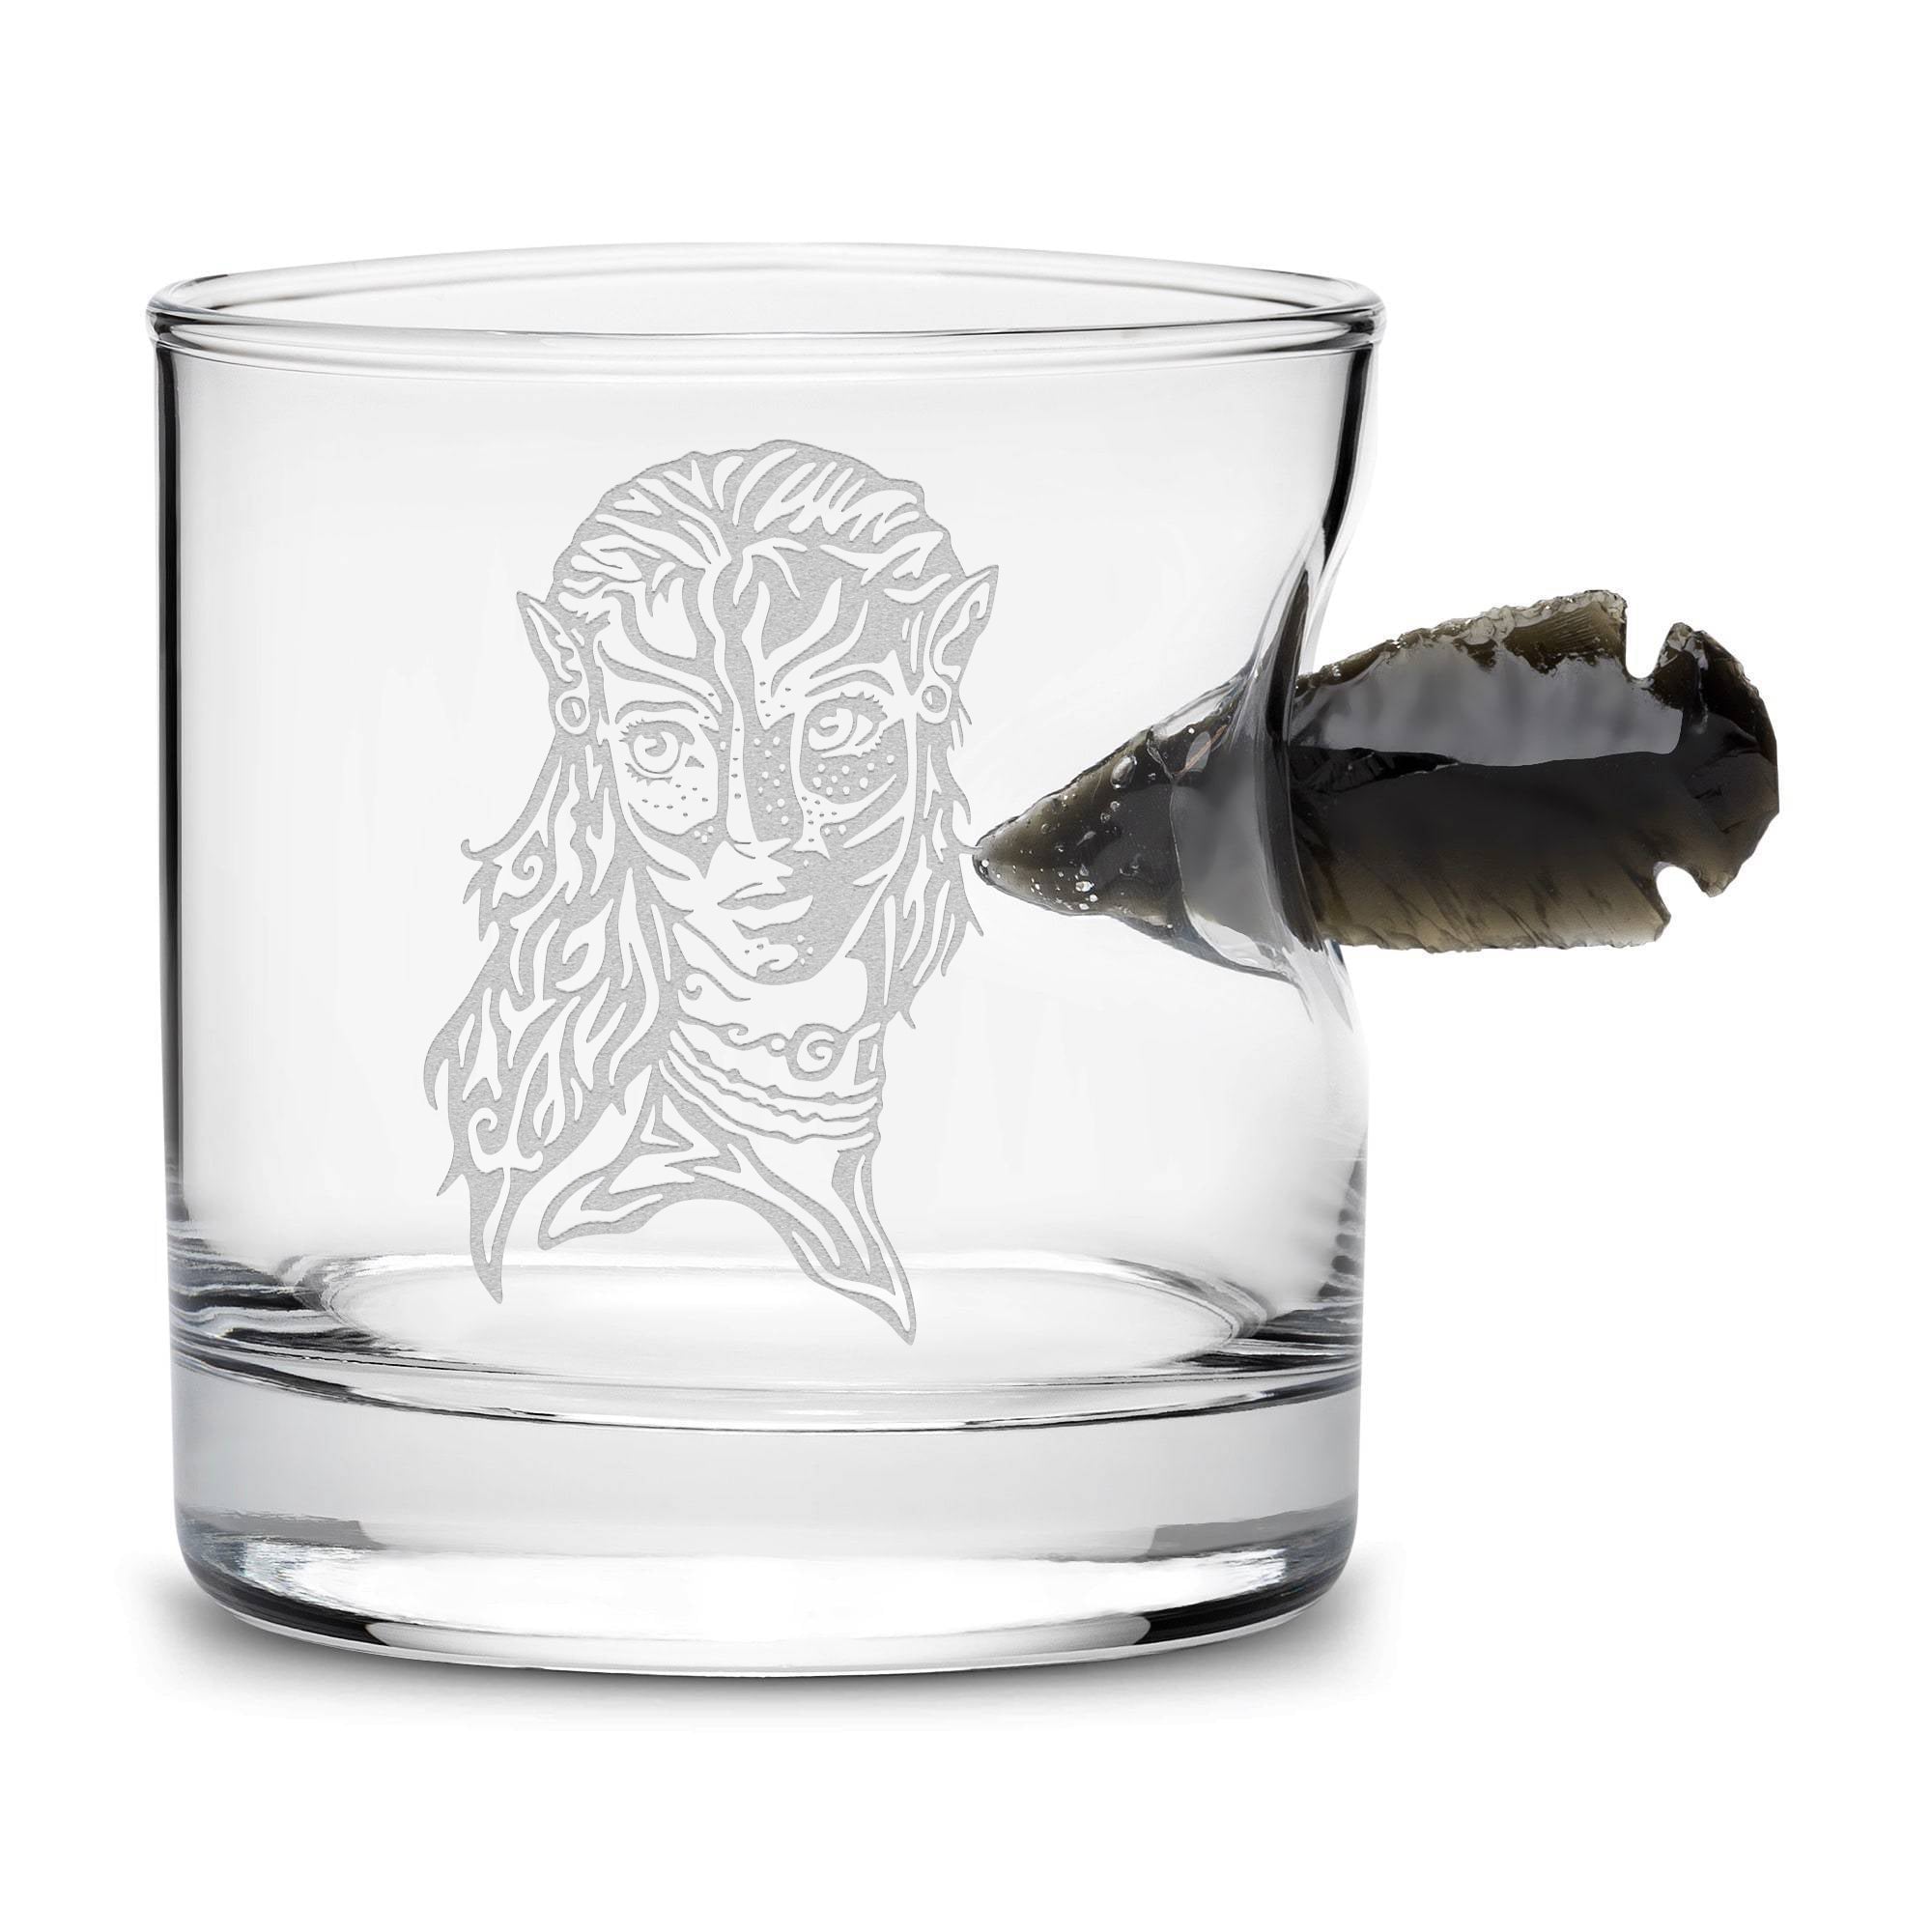 Integrity Bottles, Pandora Way of Water, Avatar Warrior Neytiri, Obsidian Arrowhead, Whiskey Glass, 15oz, Laser Etched or Hand Etched